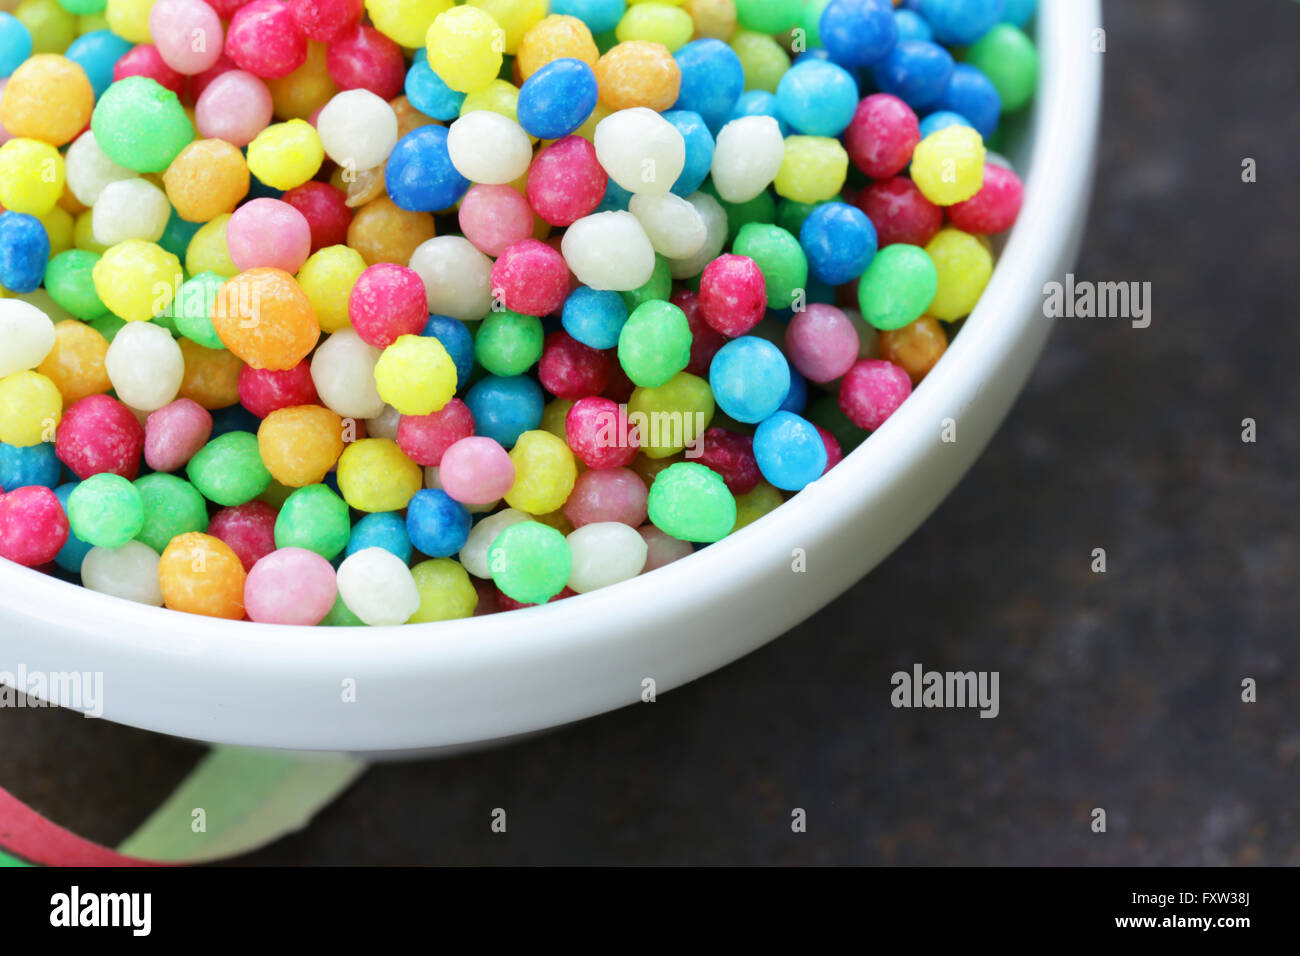 Fruits multicolores jelly beans sweet candy topping Banque D'Images